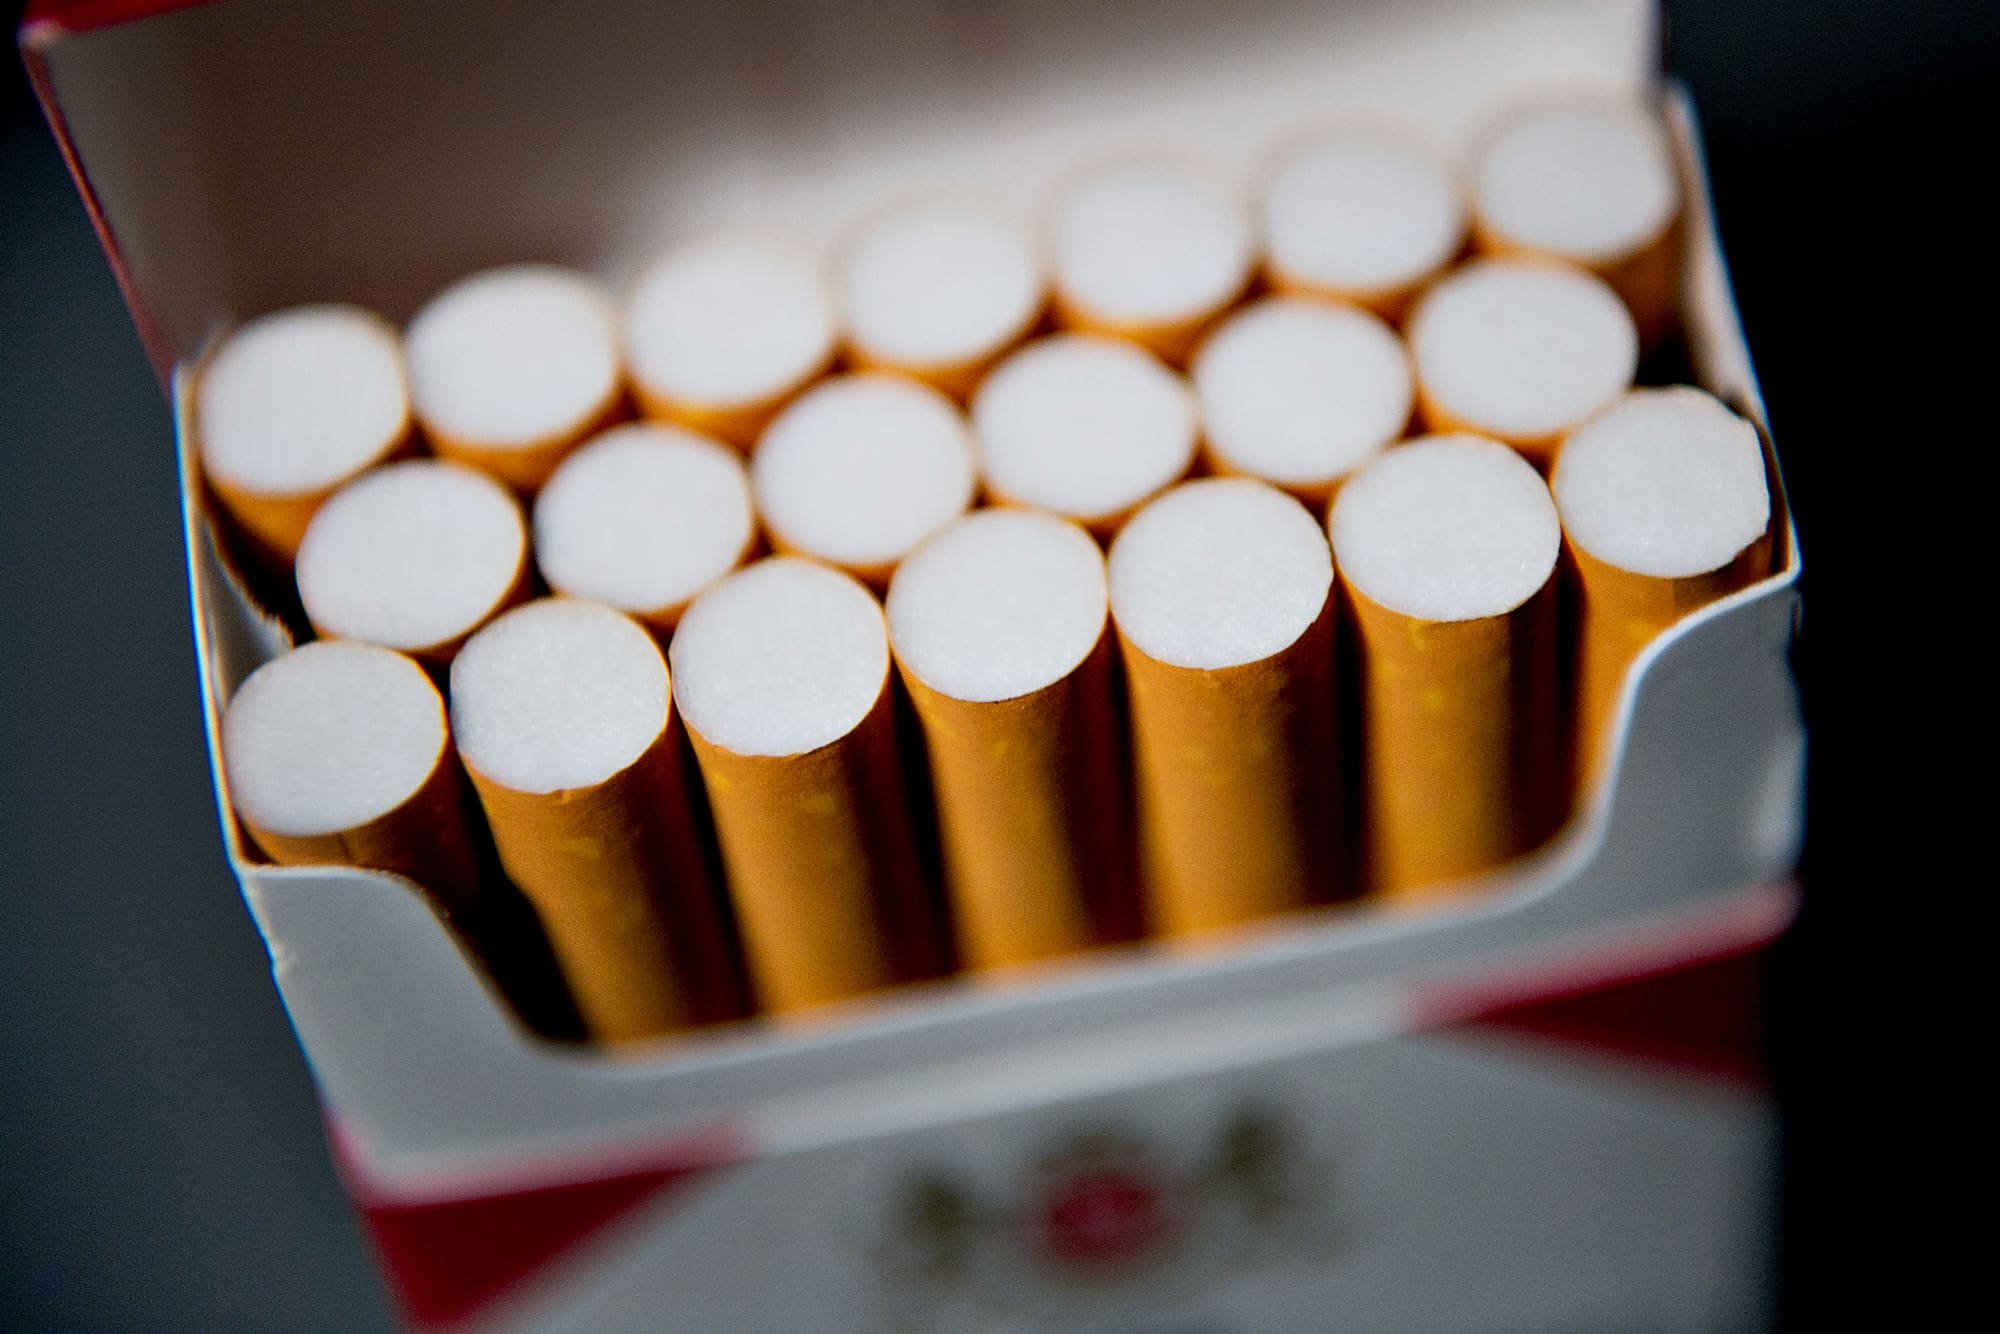 Tobacco shares drop on report Biden is planning to restrict cigarette nicotine